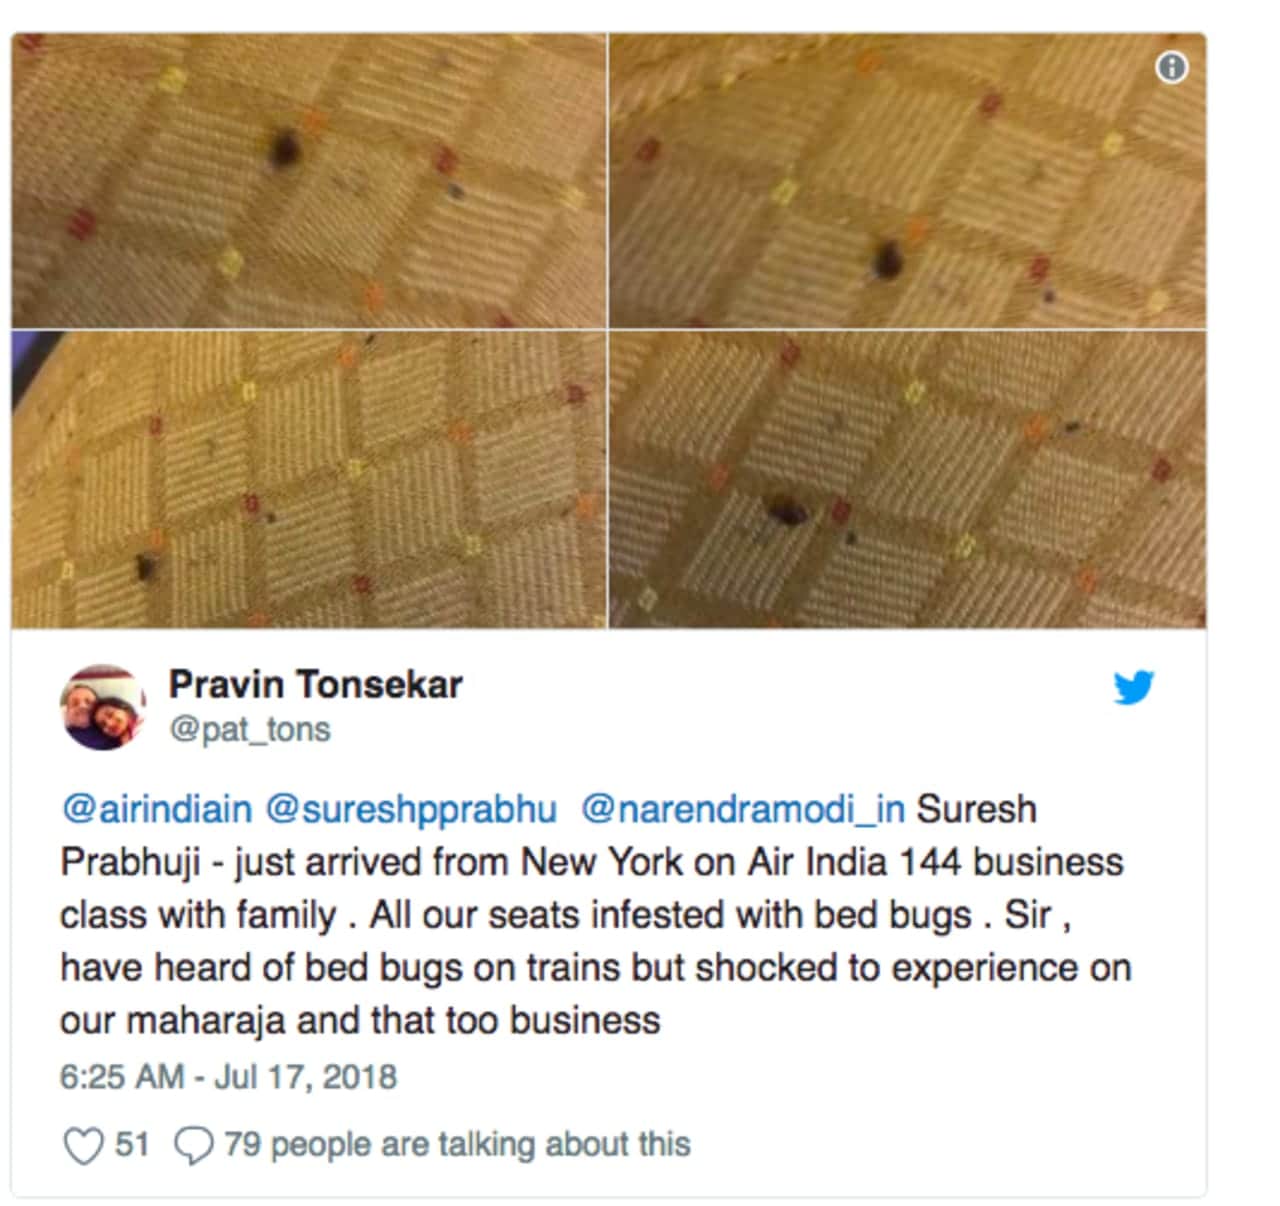 Passengers are reporting bed bugs on Air India flights from Newark.